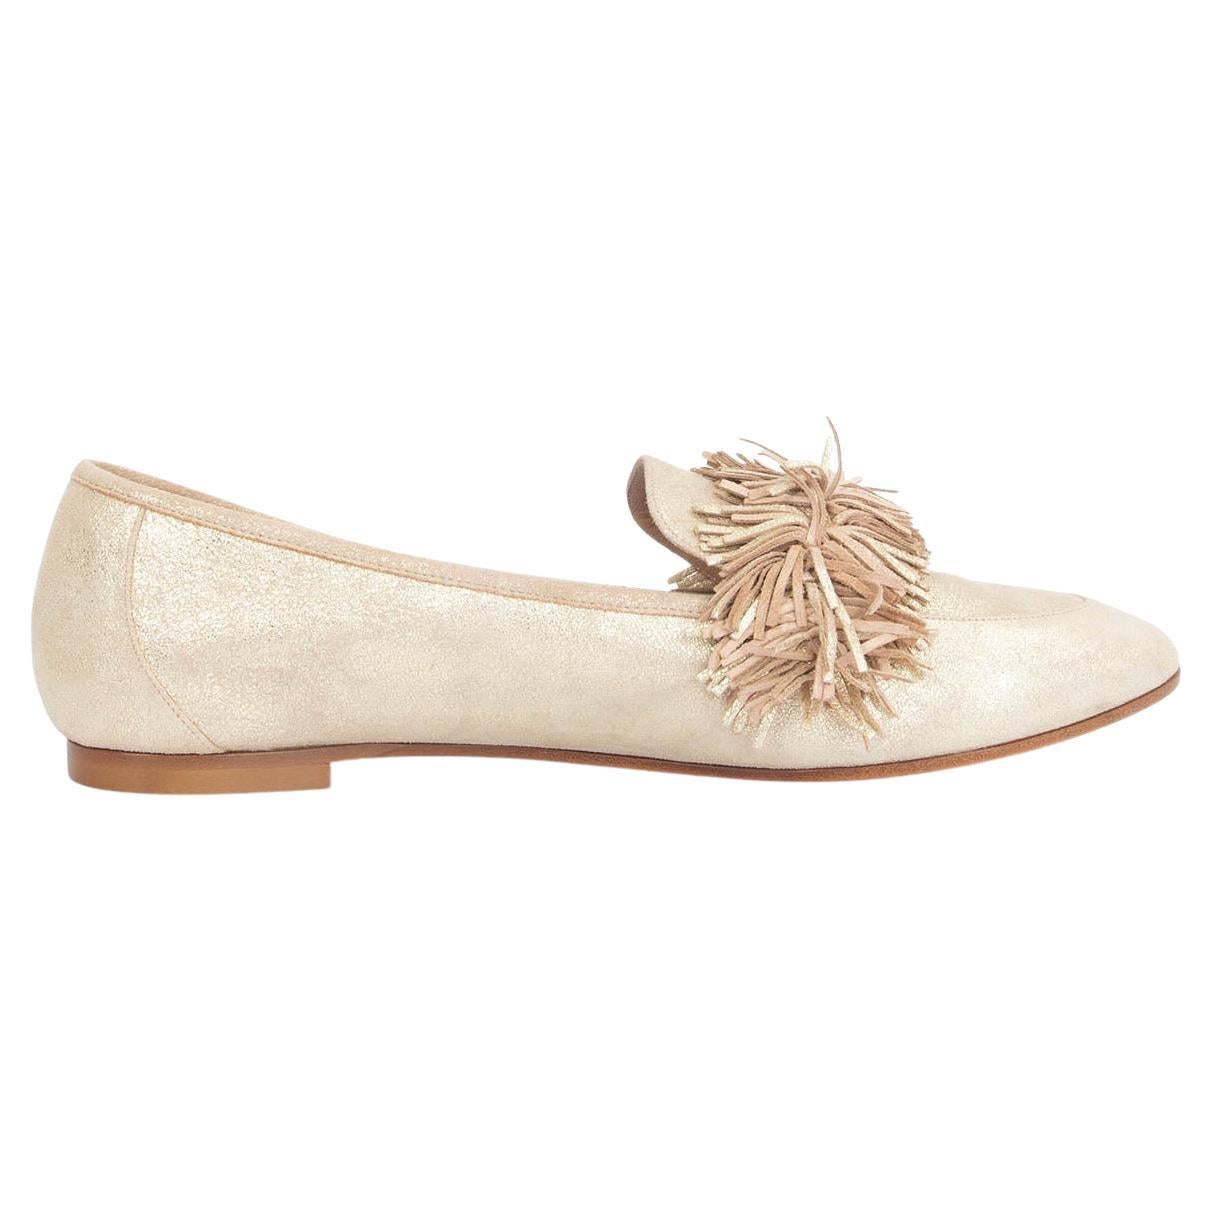 AQUAZZURA light gold suede WILD THING Loafers Flats Shoes 40 For Sale